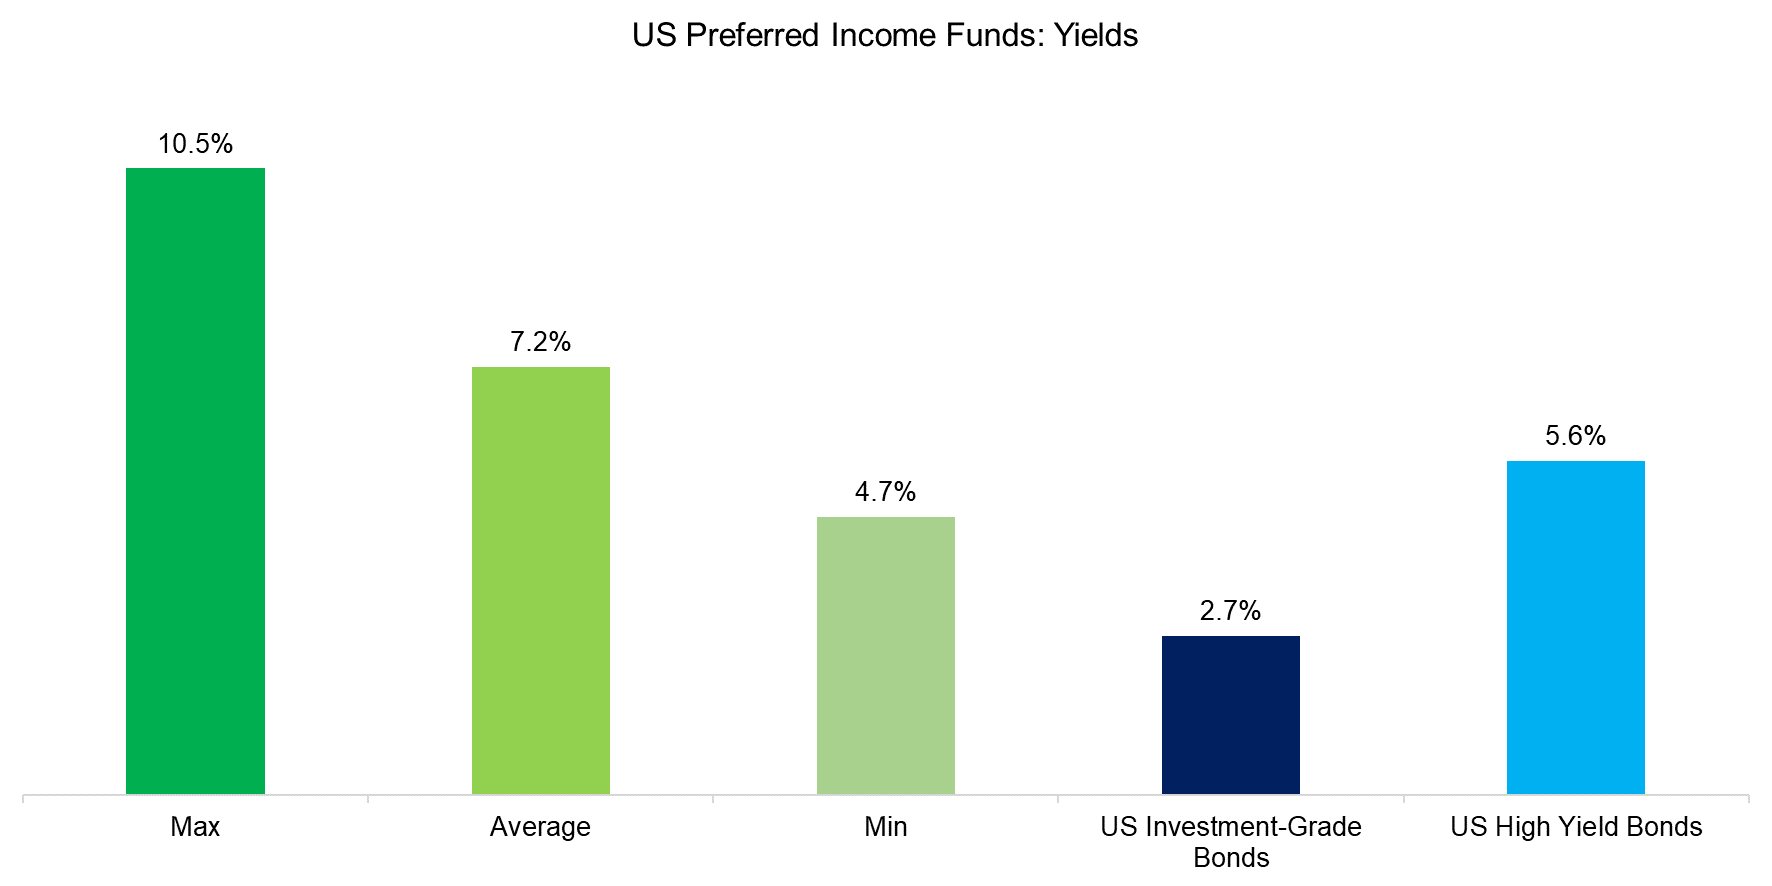 US Preferred Income Funds Yields